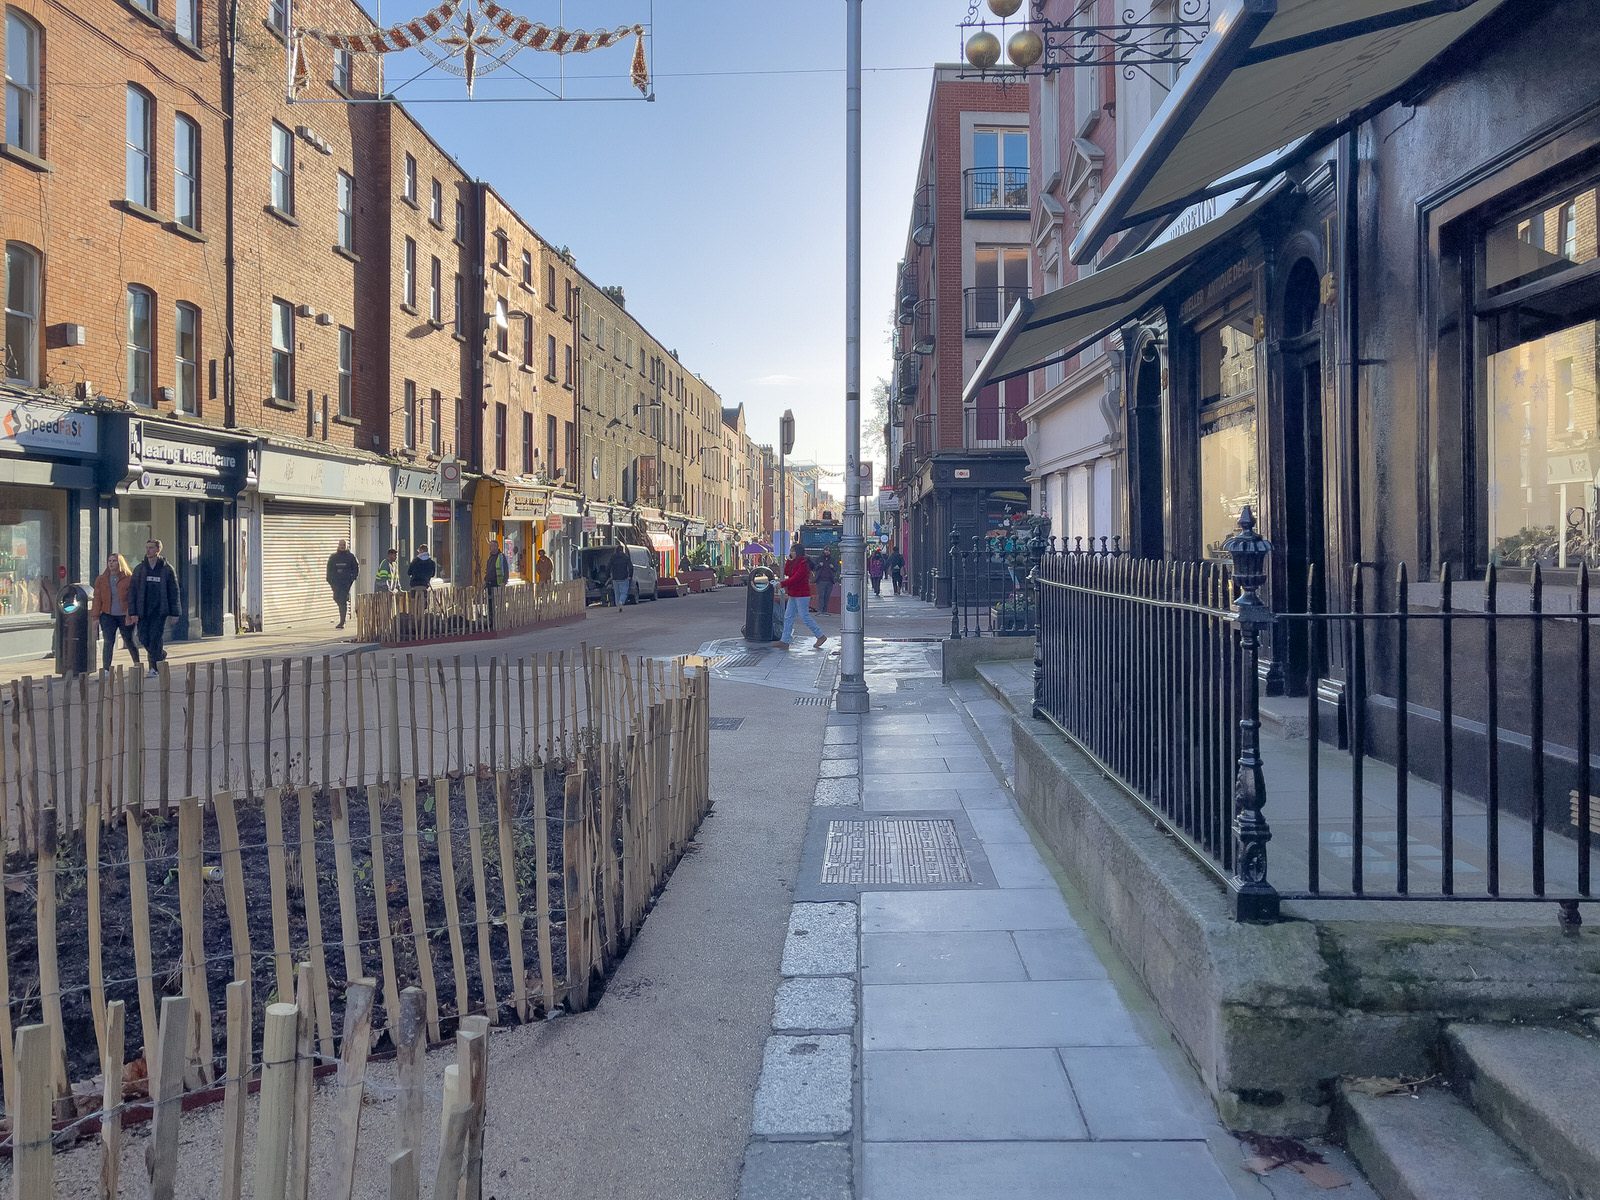 THE NEW STREET FURNITURE AND THE CHRISTMAS TREE [HAVE ARRIVED IN CAPEL STREET]-225850-1